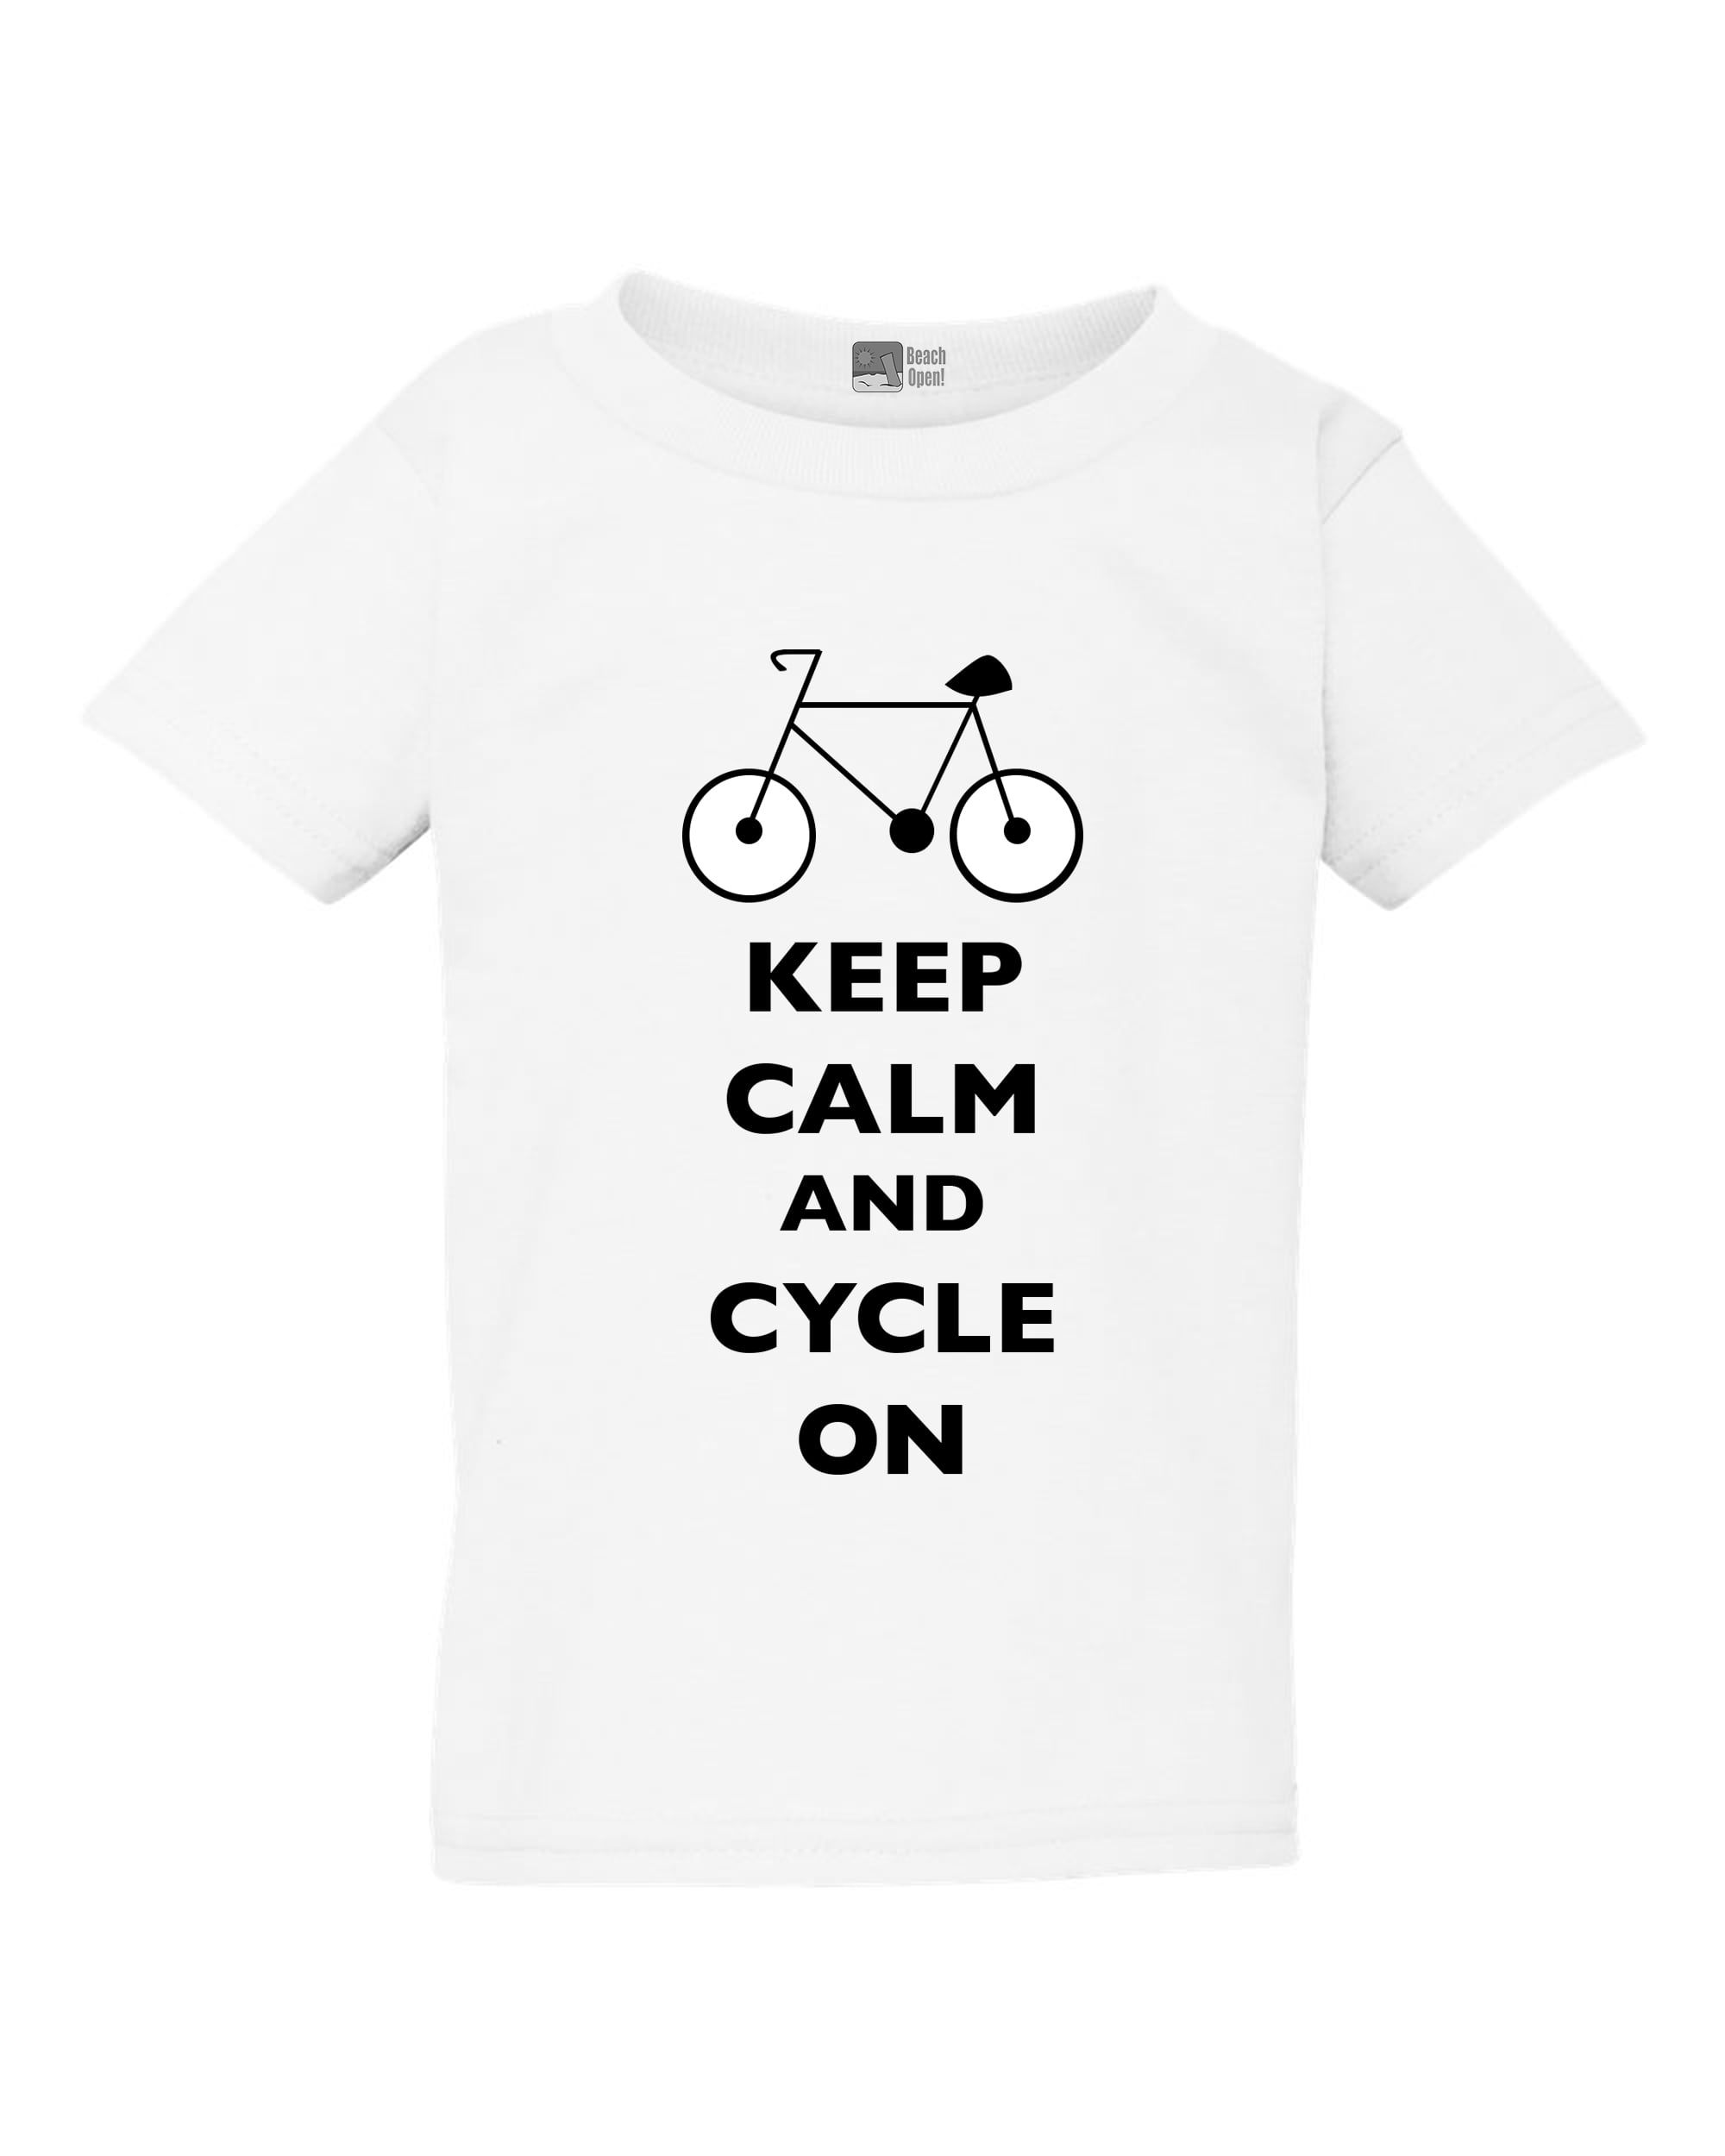 Keep Calm and Cycle On Cyclist Bicycle Toddler Kids T-Shirt Tee